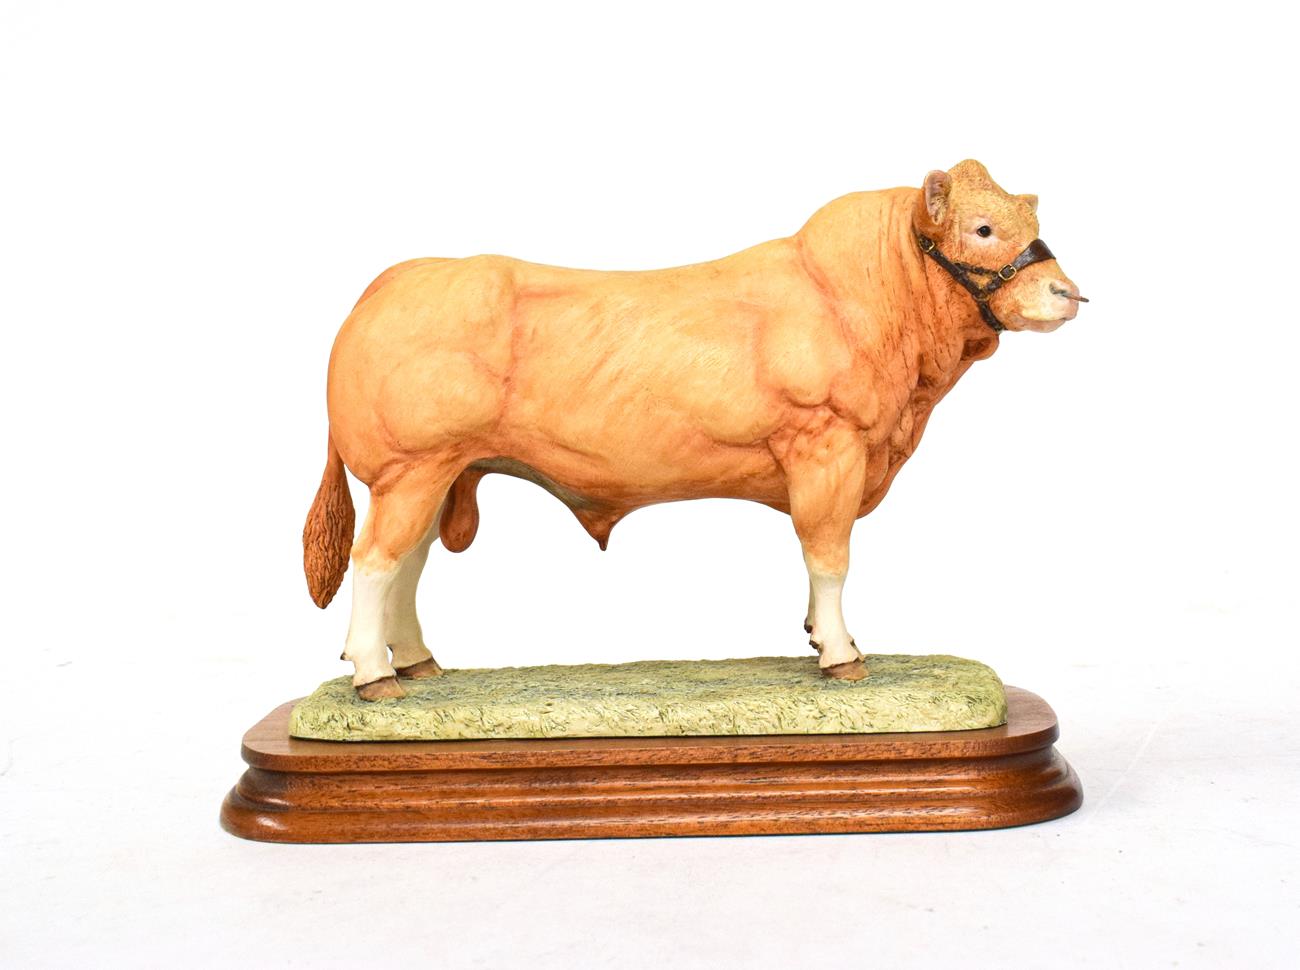 Lot 19 - Border Fine Arts 'Blonde D'Aquitaine Bull', model No. L116 by Ray Ayres, limited edition 34/500, on